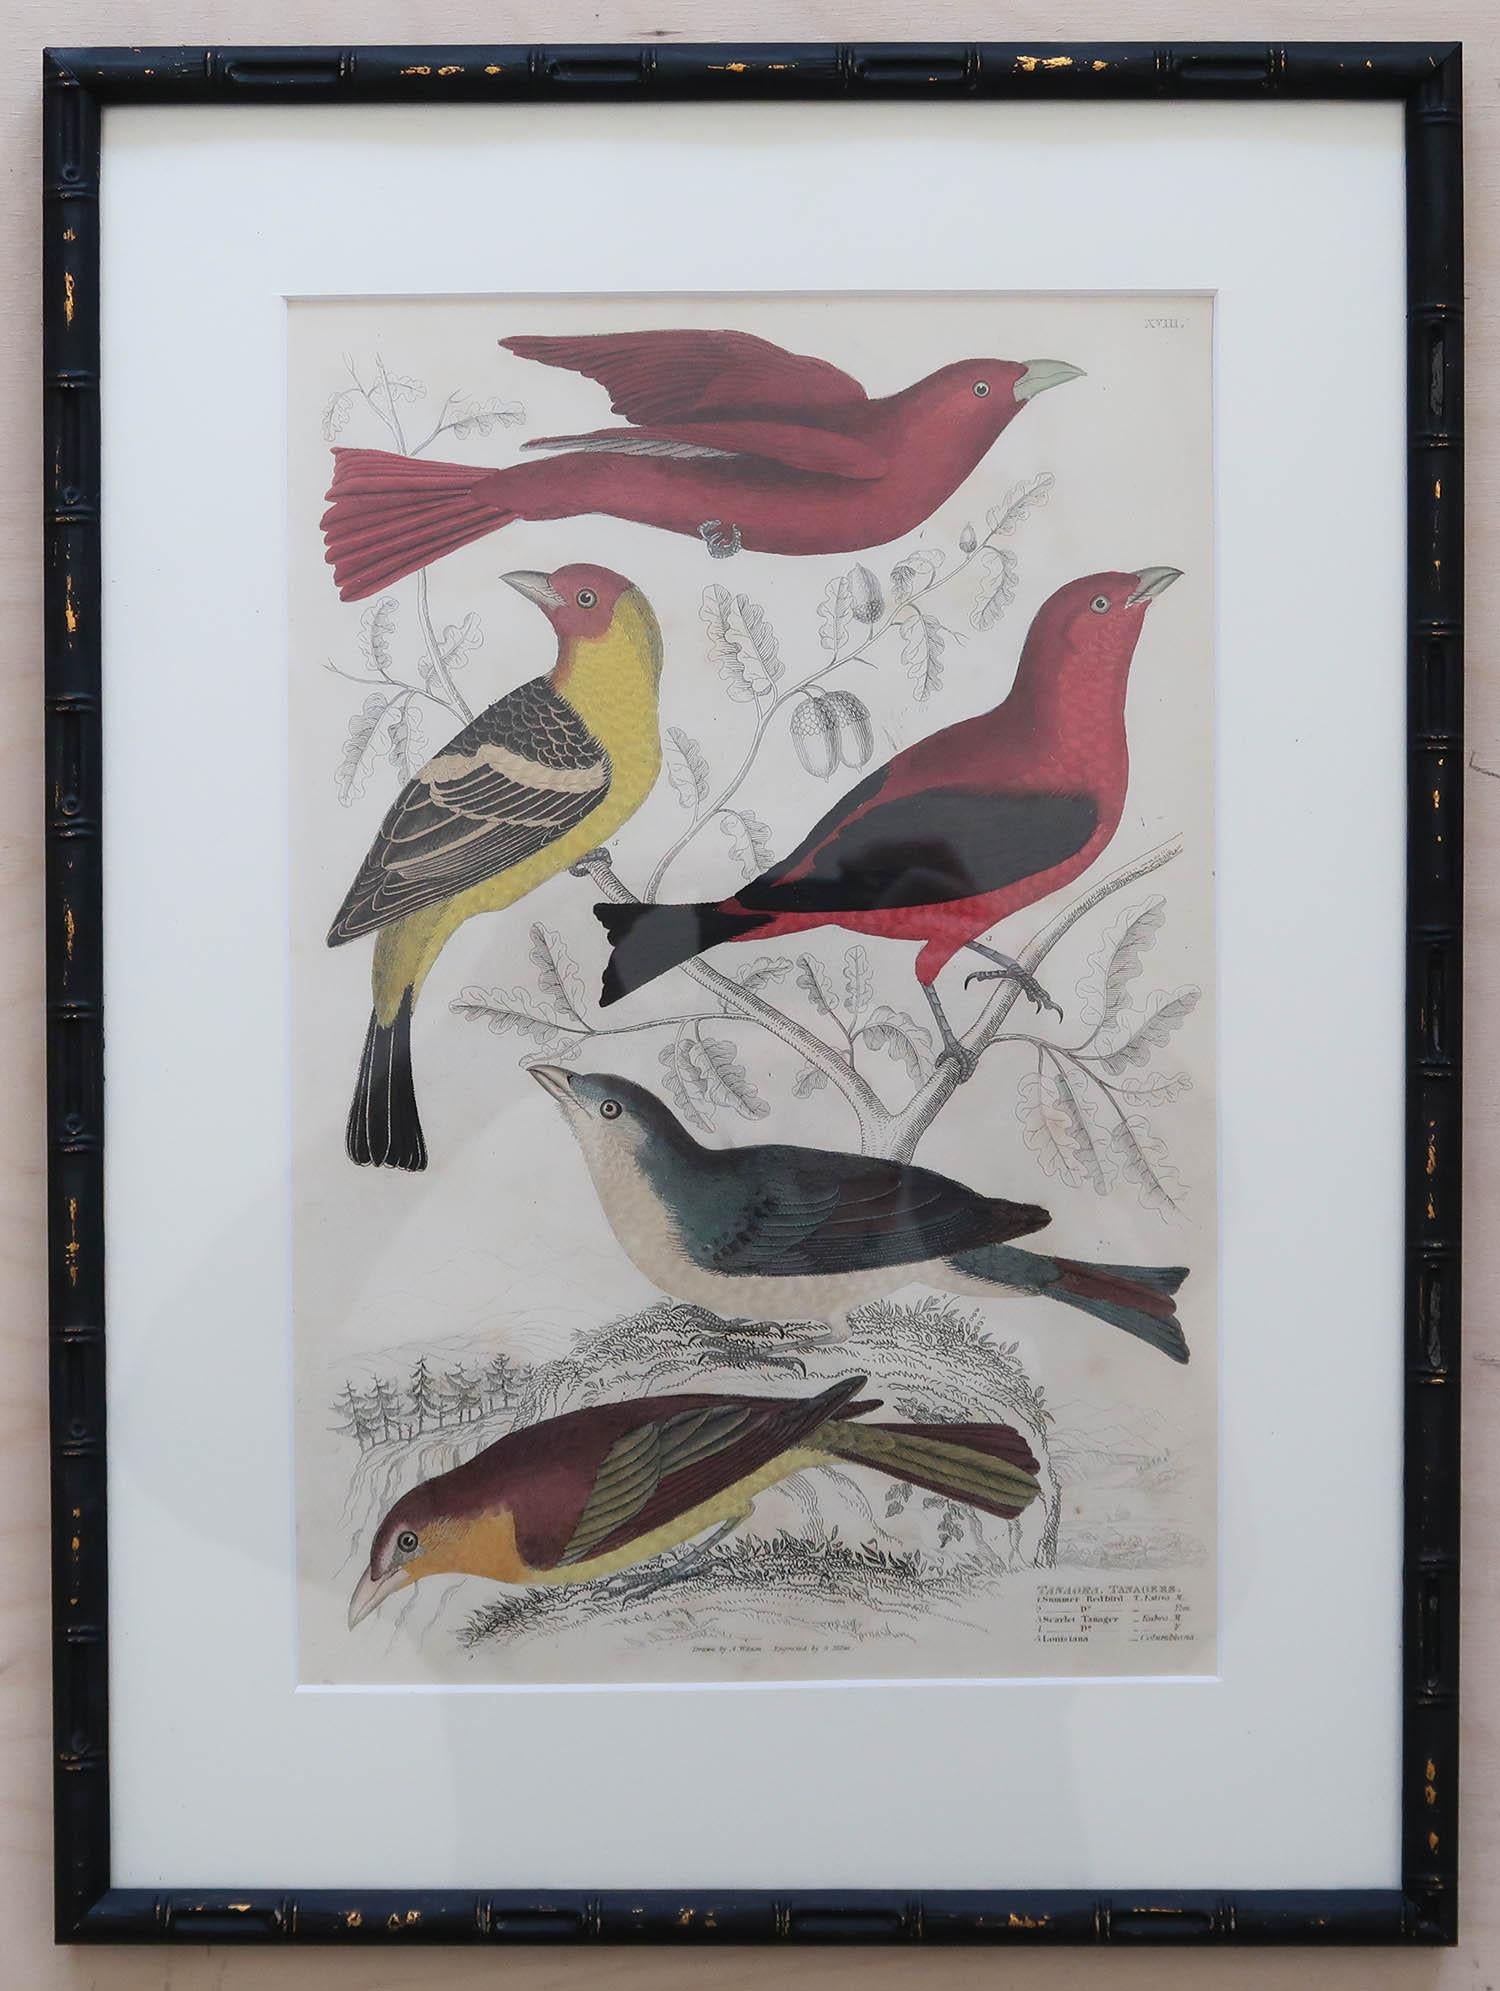 Chinoiserie Set of 15 Antique Exotic Bird Prints in Ebonised Faux Bamboo Frames, C.1835